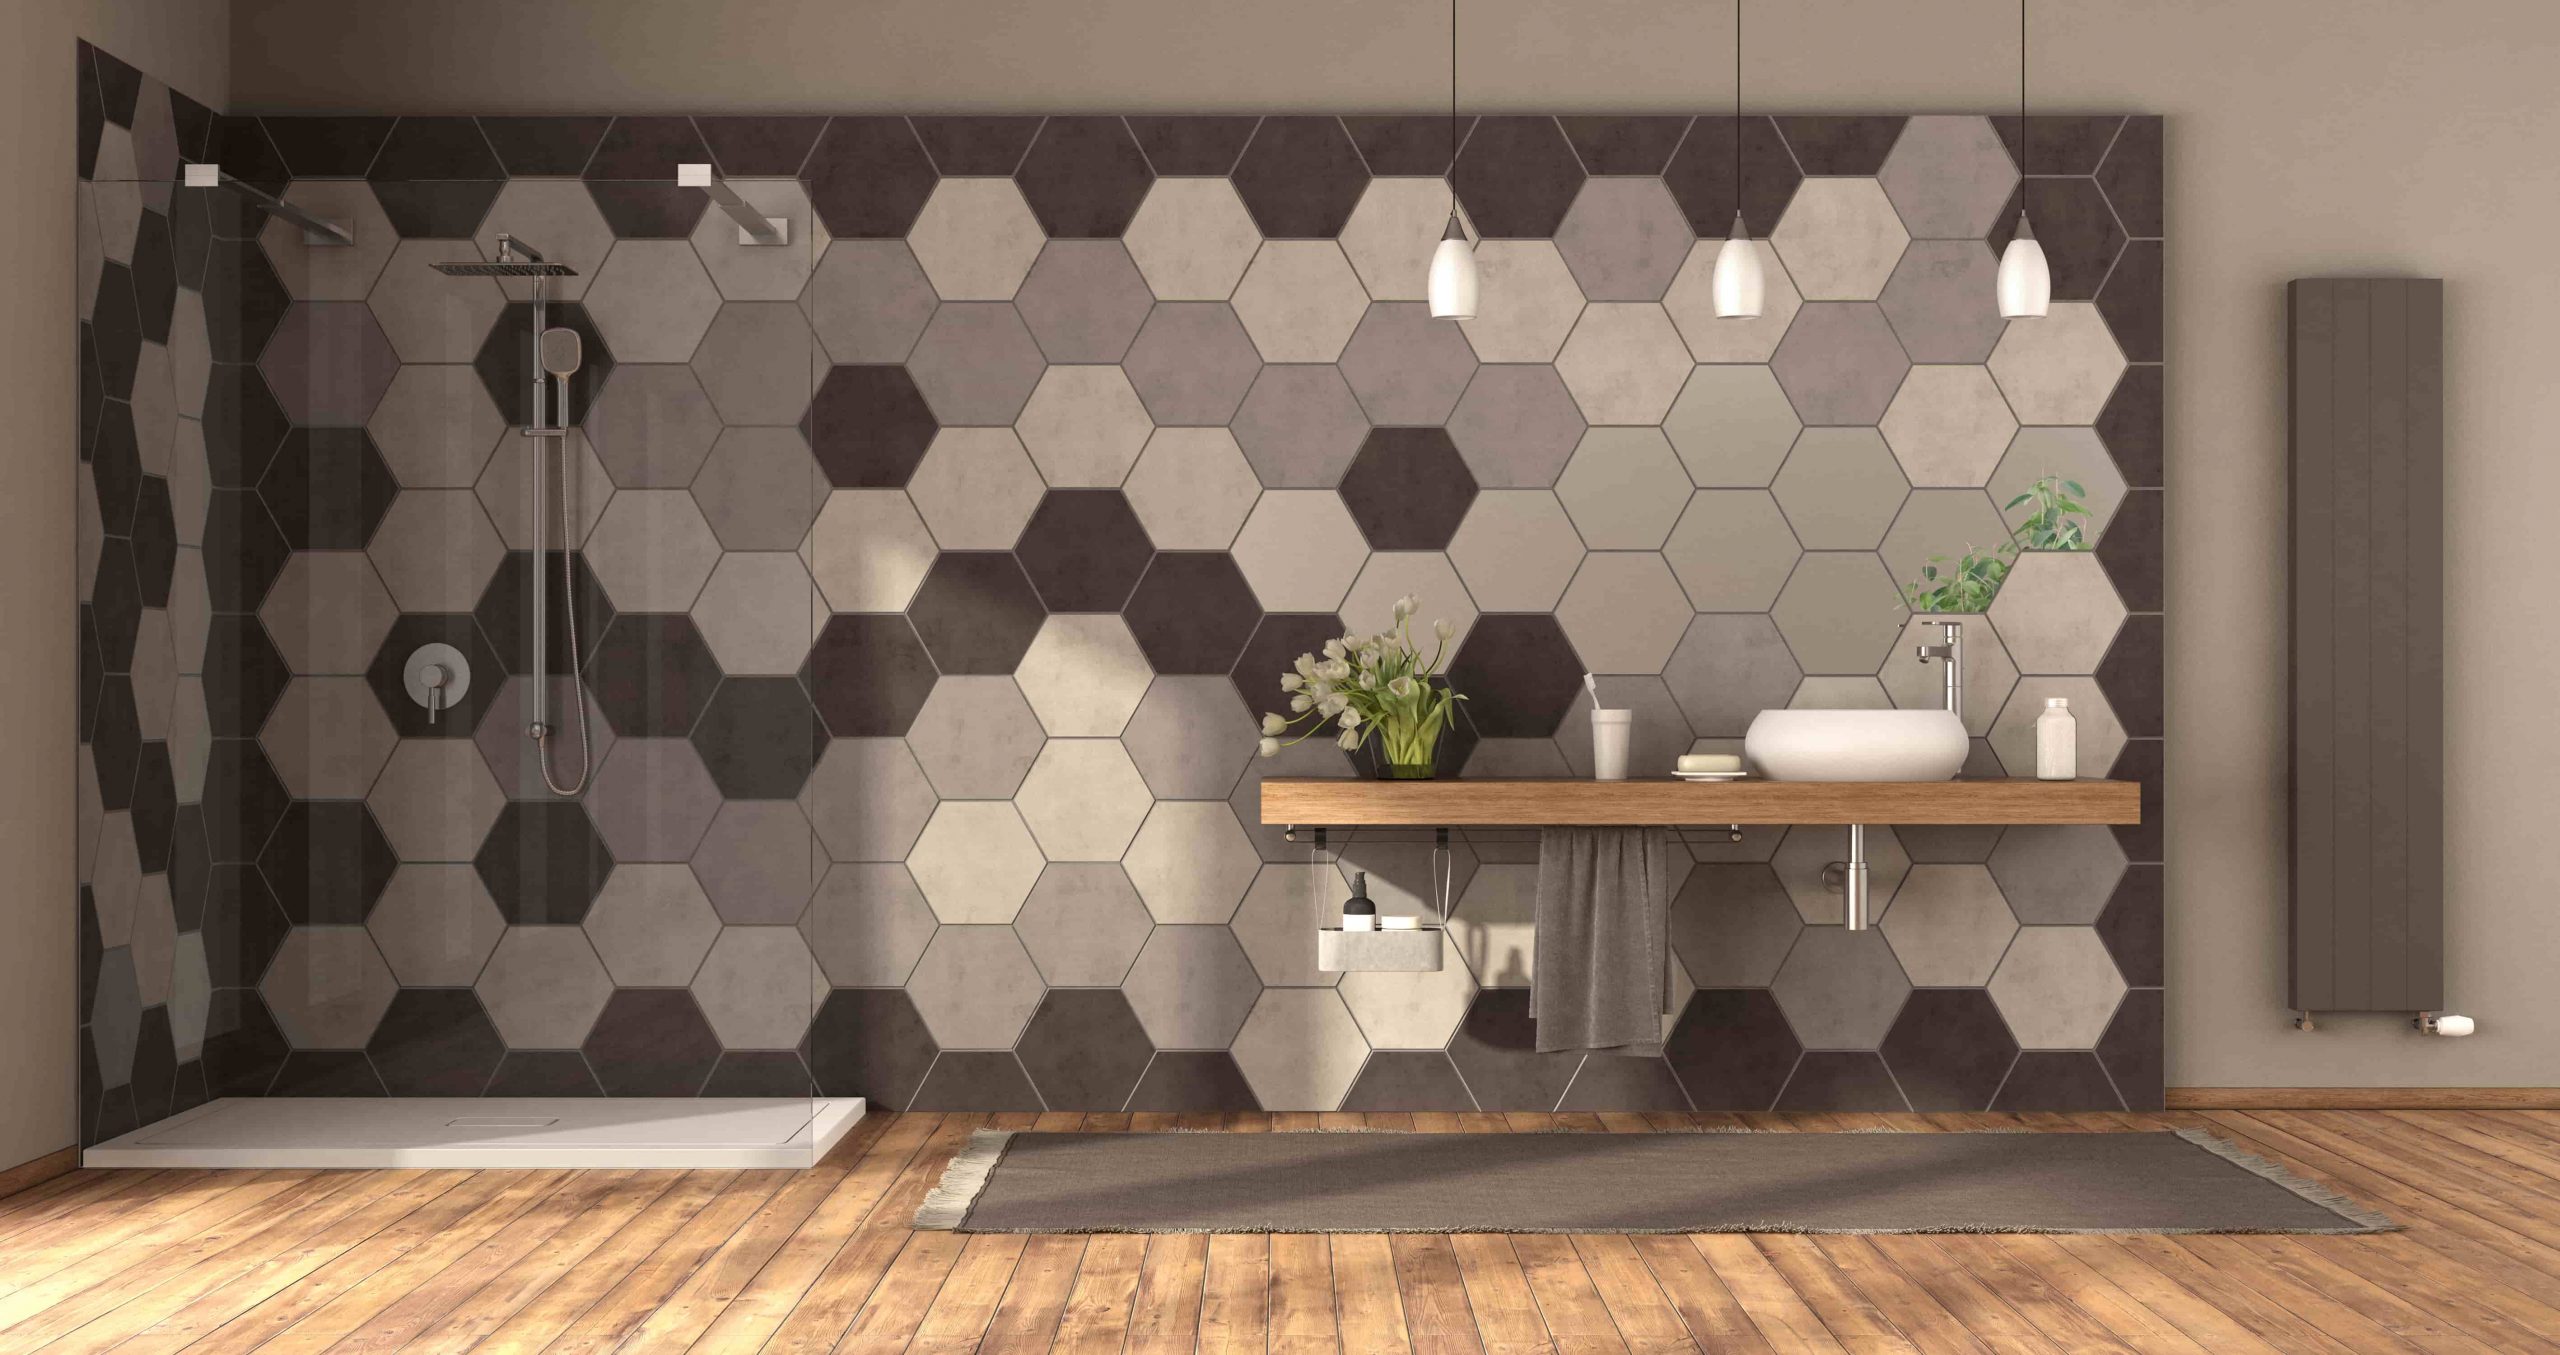 How to install hexagonal tiles step by step